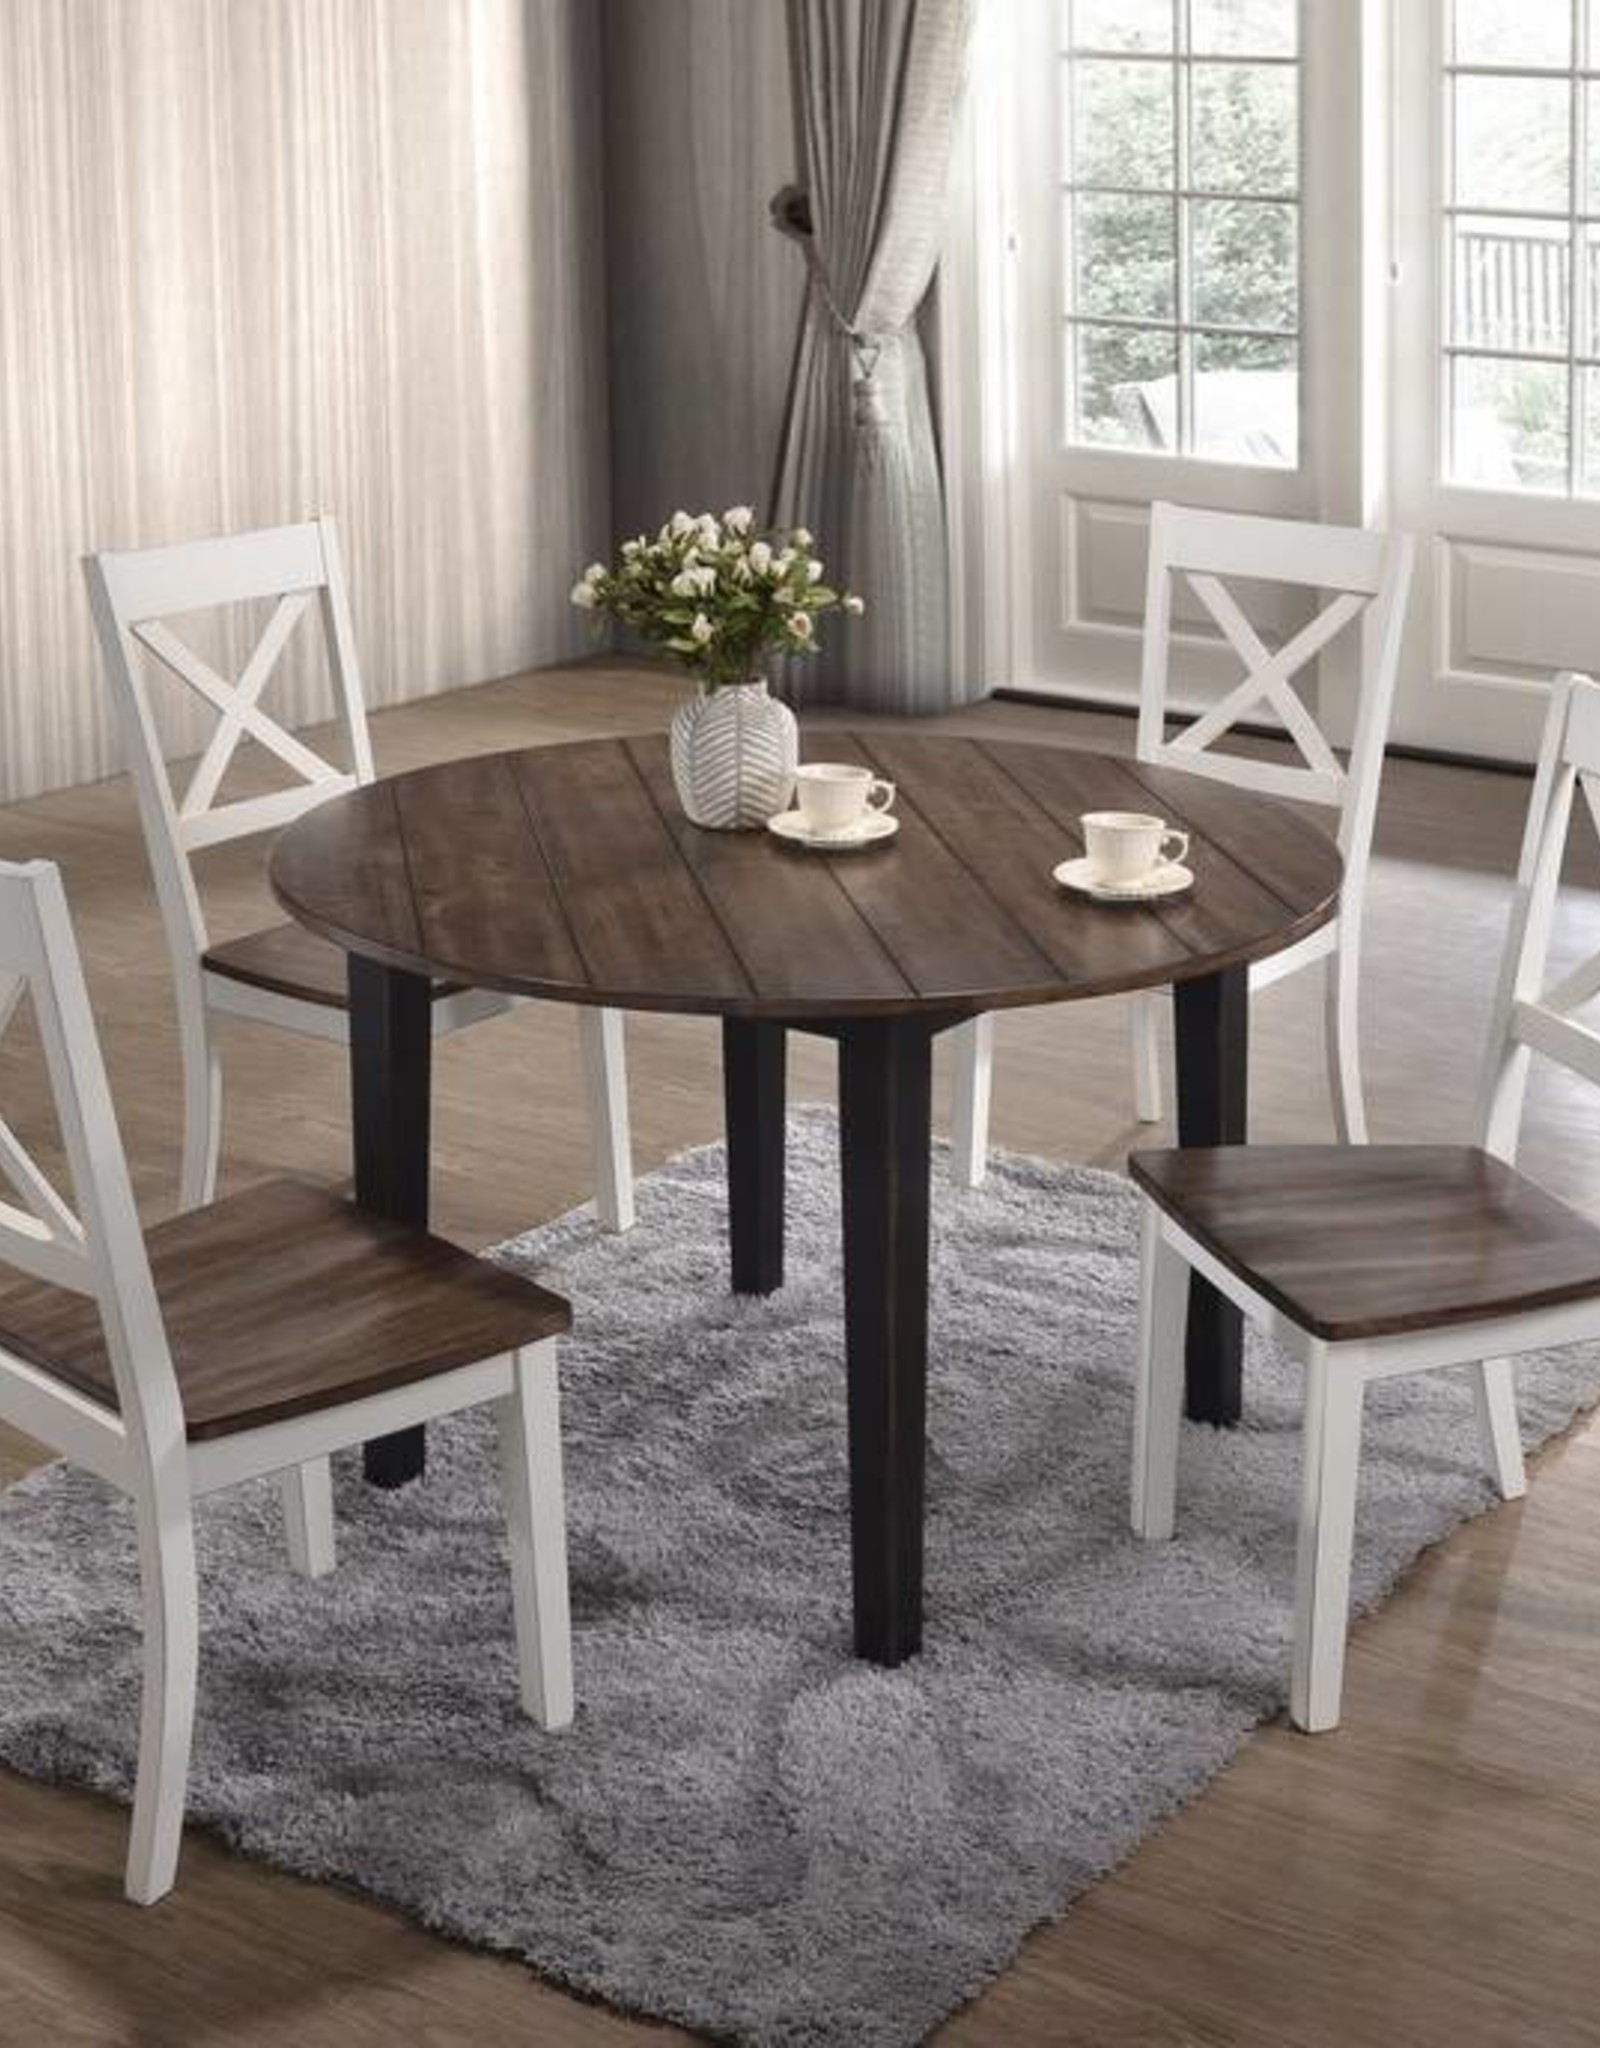 A La Carte Farmhouse Round Dining Table w/ 4 Chairs ...